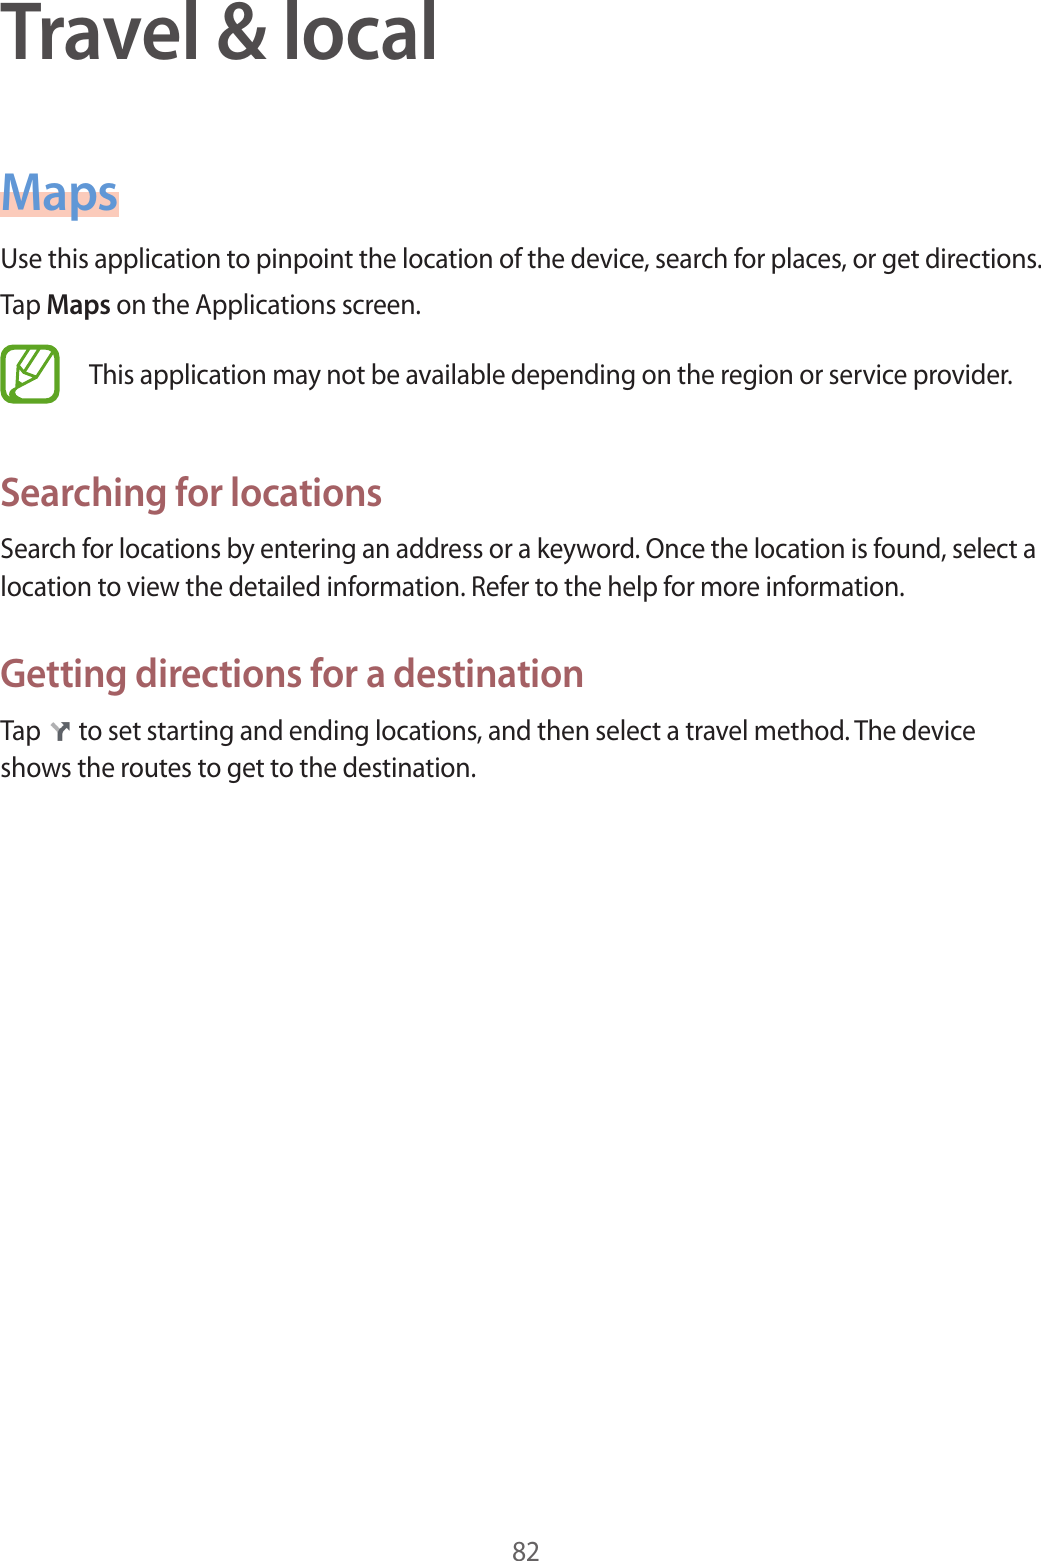 82Travel &amp; localMapsUse this application to pinpoint the location of the device, search for places, or get directions.Tap Maps on the Applications screen.This application may not be available depending on the region or service provider.Searching for locationsSearch for locations by entering an address or a keyword. Once the location is found, select a location to view the detailed information. Refer to the help for more information.Getting directions for a destinationTap   to set starting and ending locations, and then select a travel method. The device shows the routes to get to the destination.